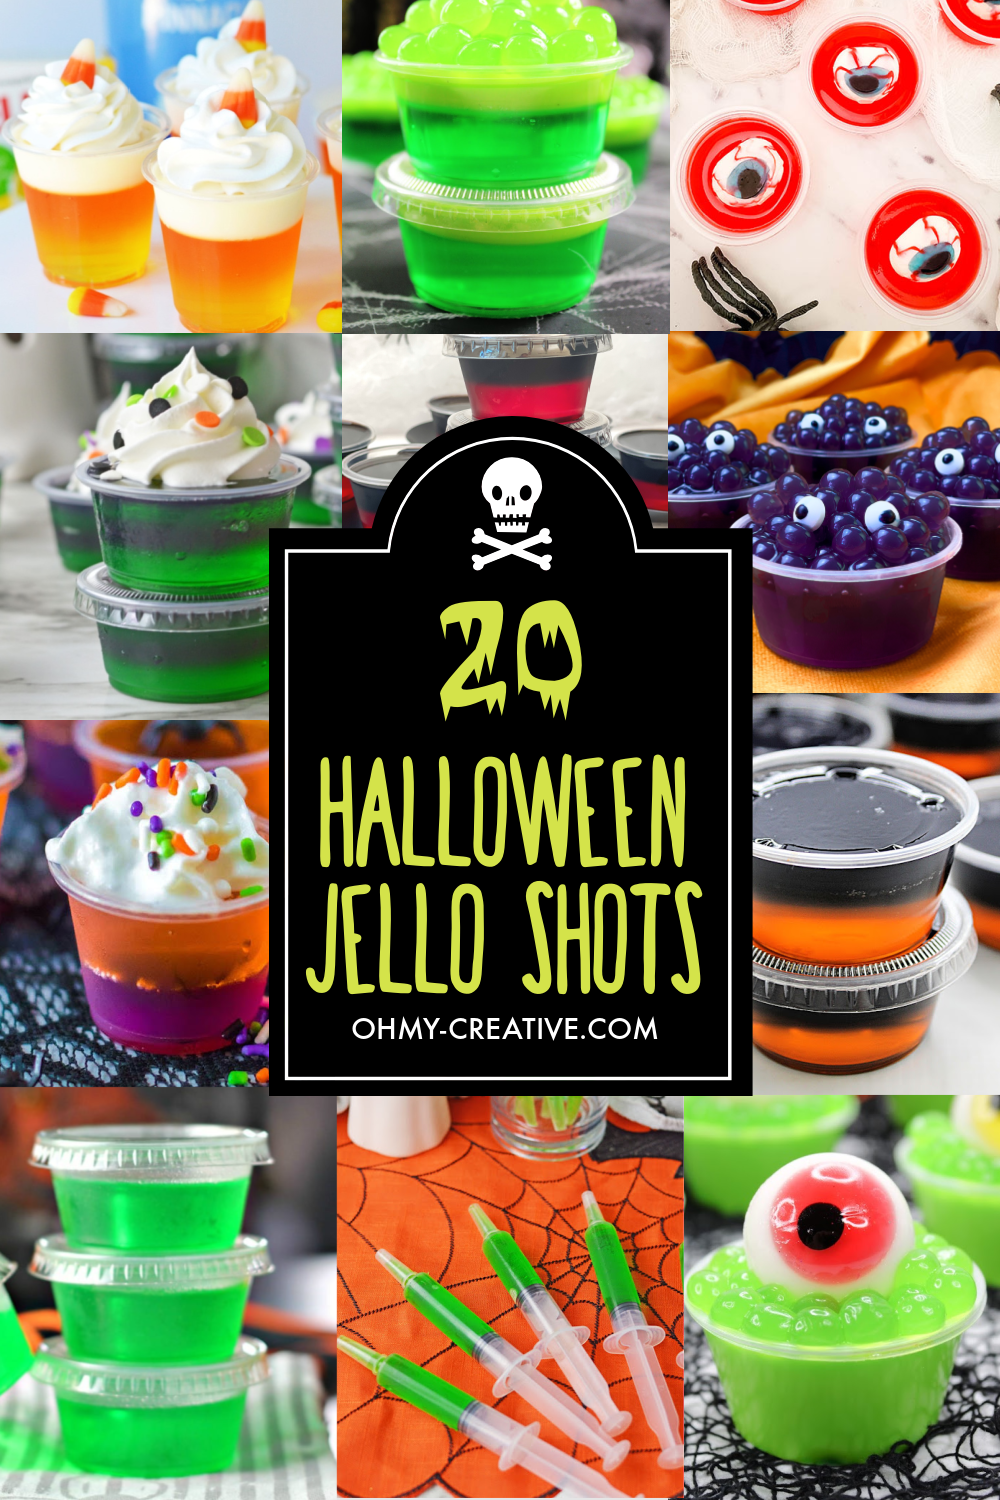 A collage of 20 Halloween jello shot party ideas.